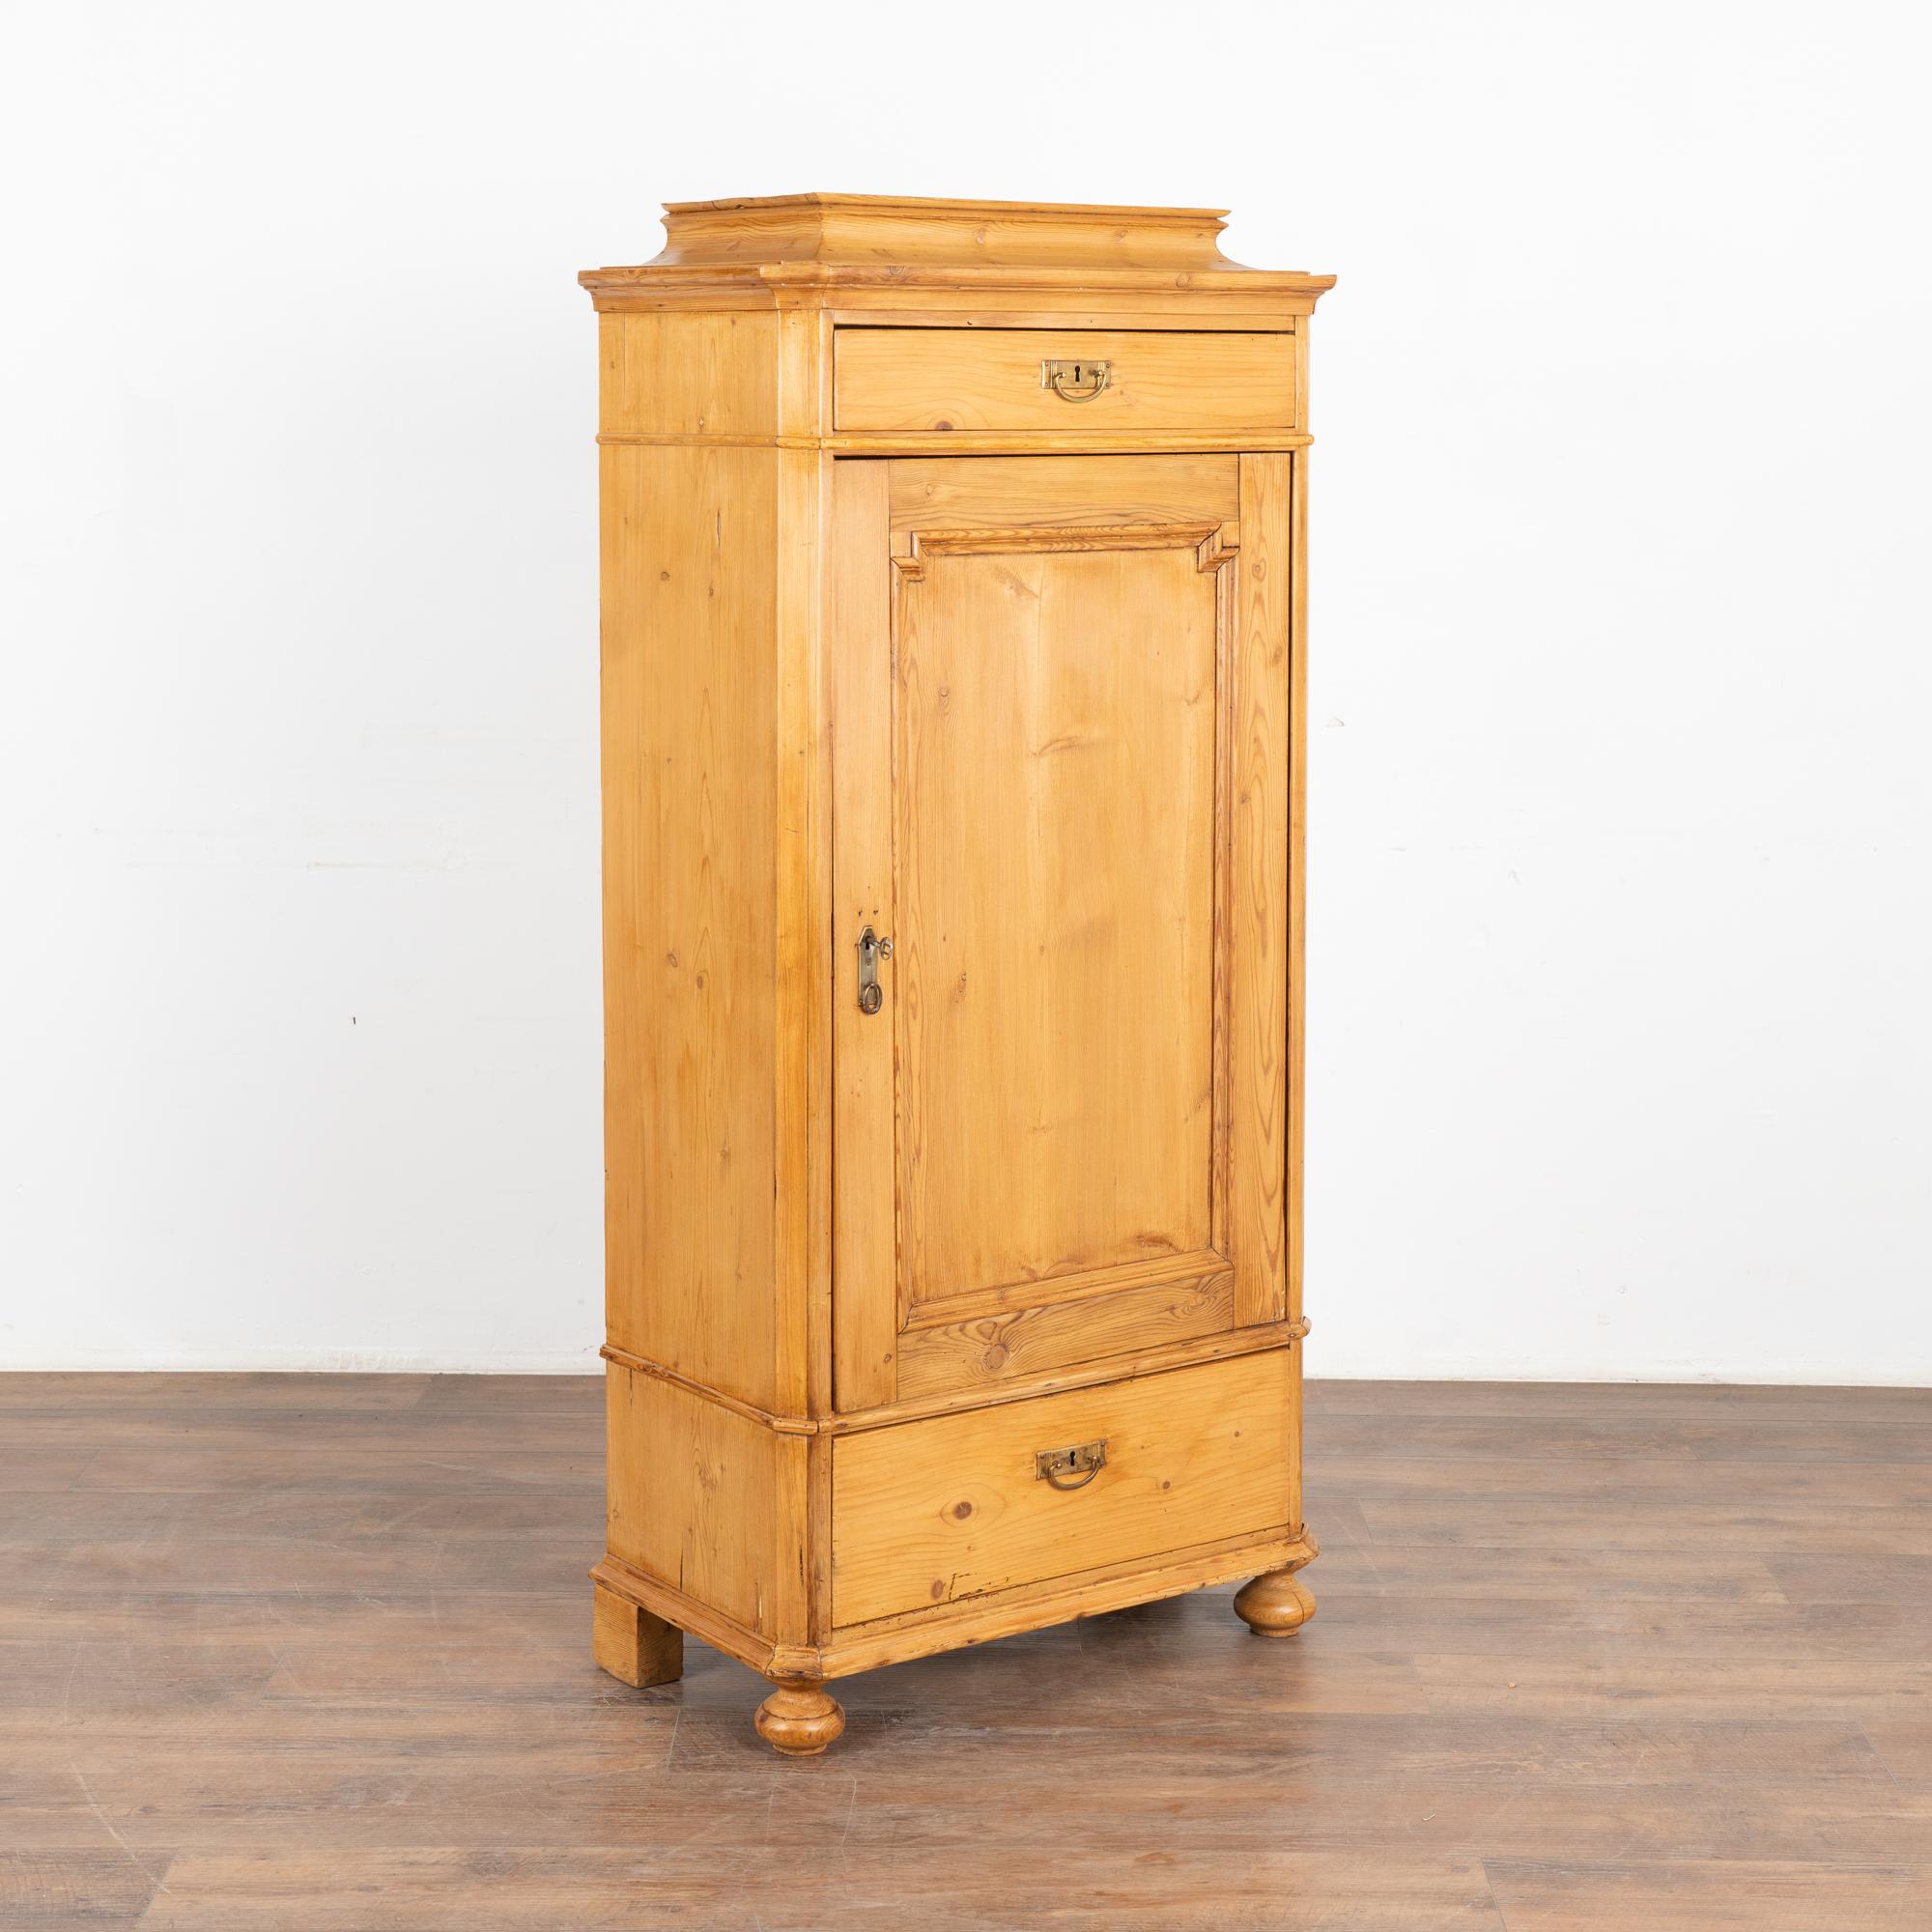 Narrow pine one door cabinet cabinet with interior shelving, exterior has one upper and lower drawer.
Made of pine, dovetail joints and brass pulls.
Restored, stable and ready for use; one key included; works best as pull only.
Any scratches,